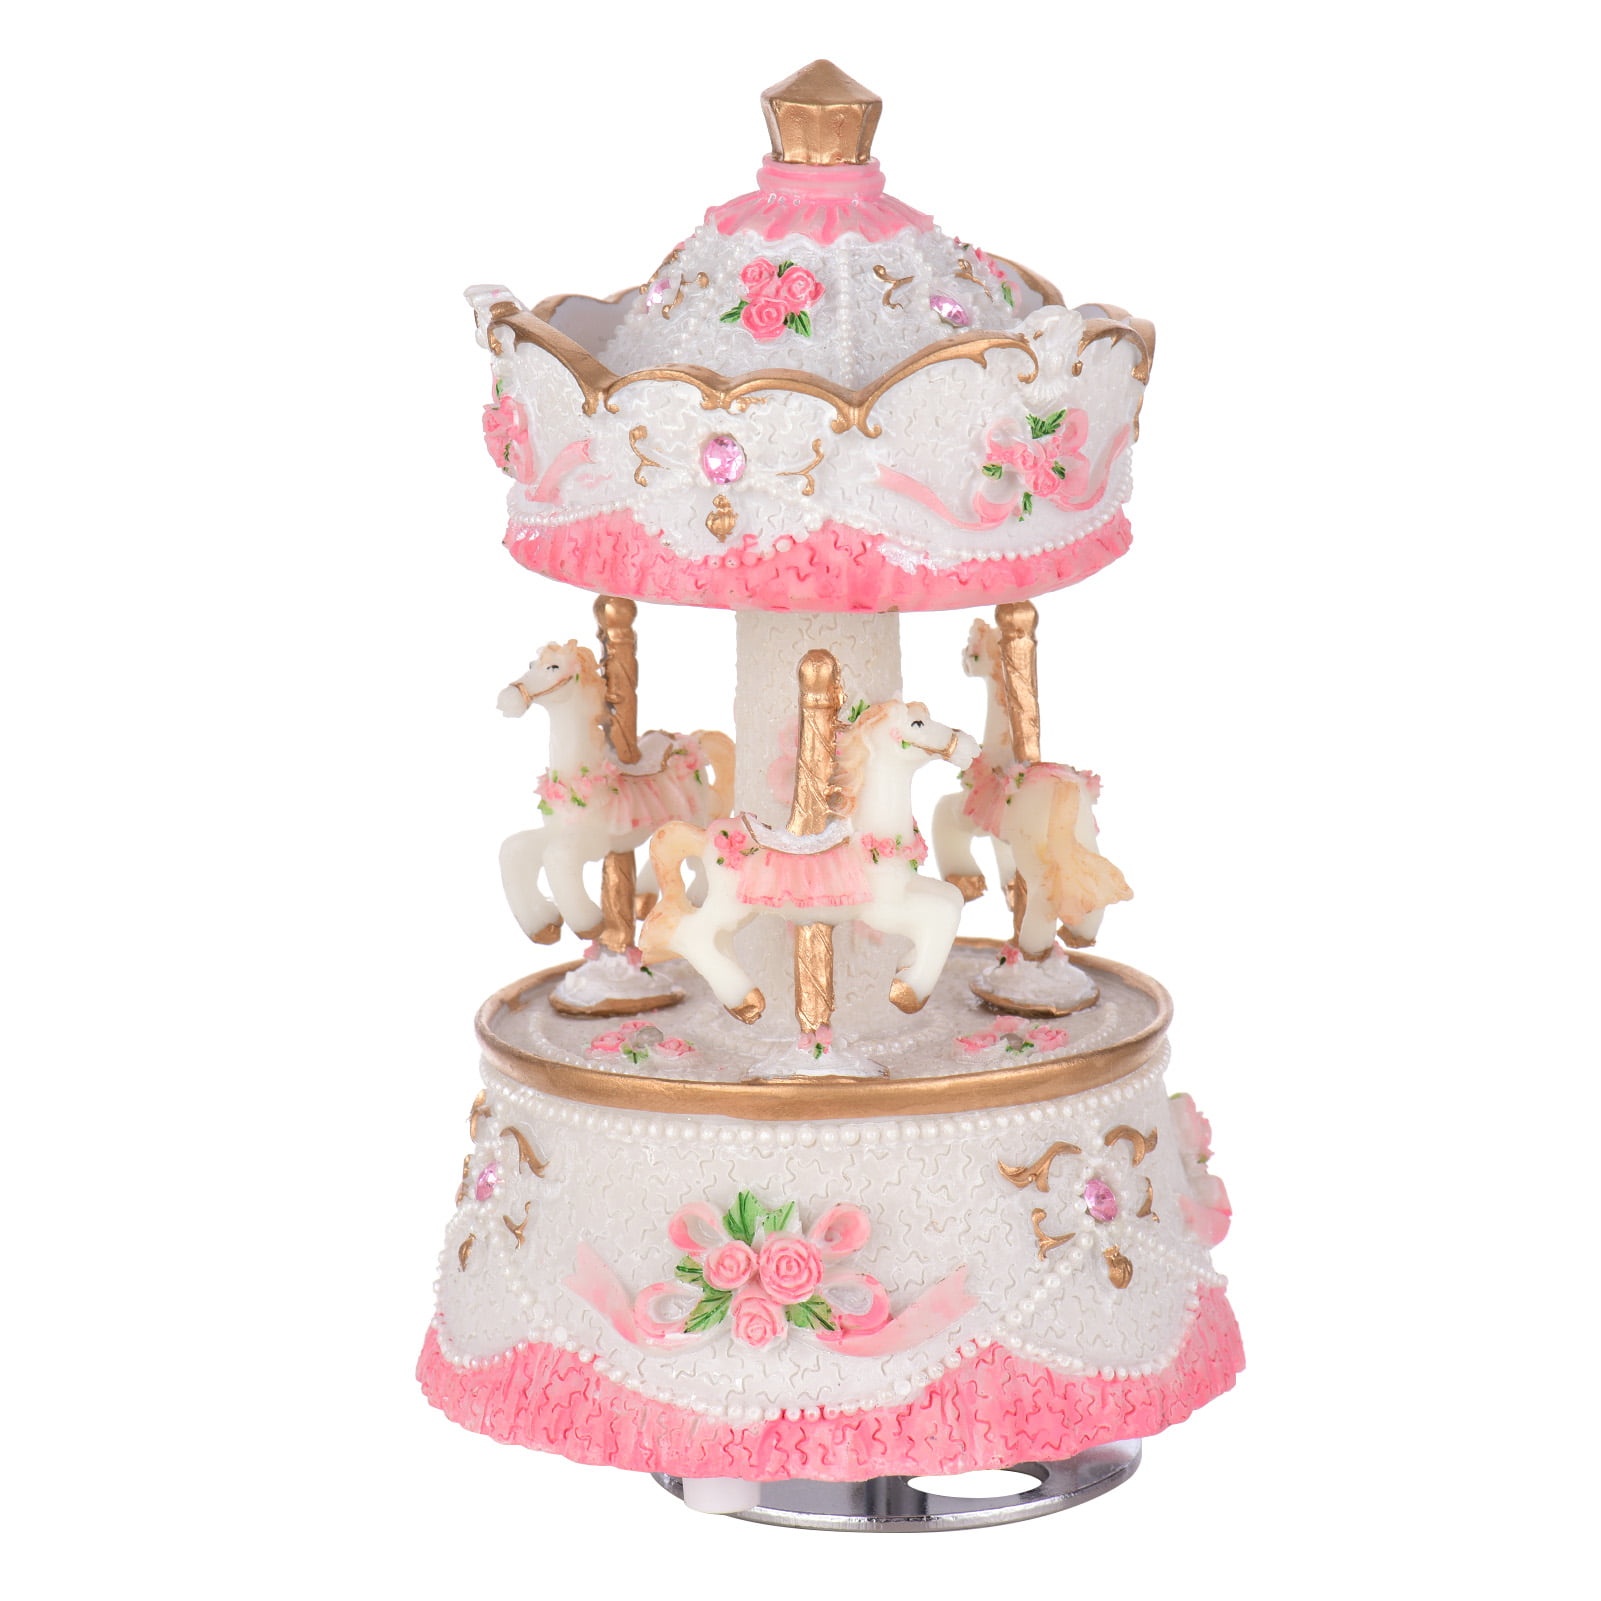 Purple Muslady Laxury Windup 3-horse Carousel Music Box Artware//Gift Melody Castle in the Sky Pink//Purple//Blue//Gold Shade for Option